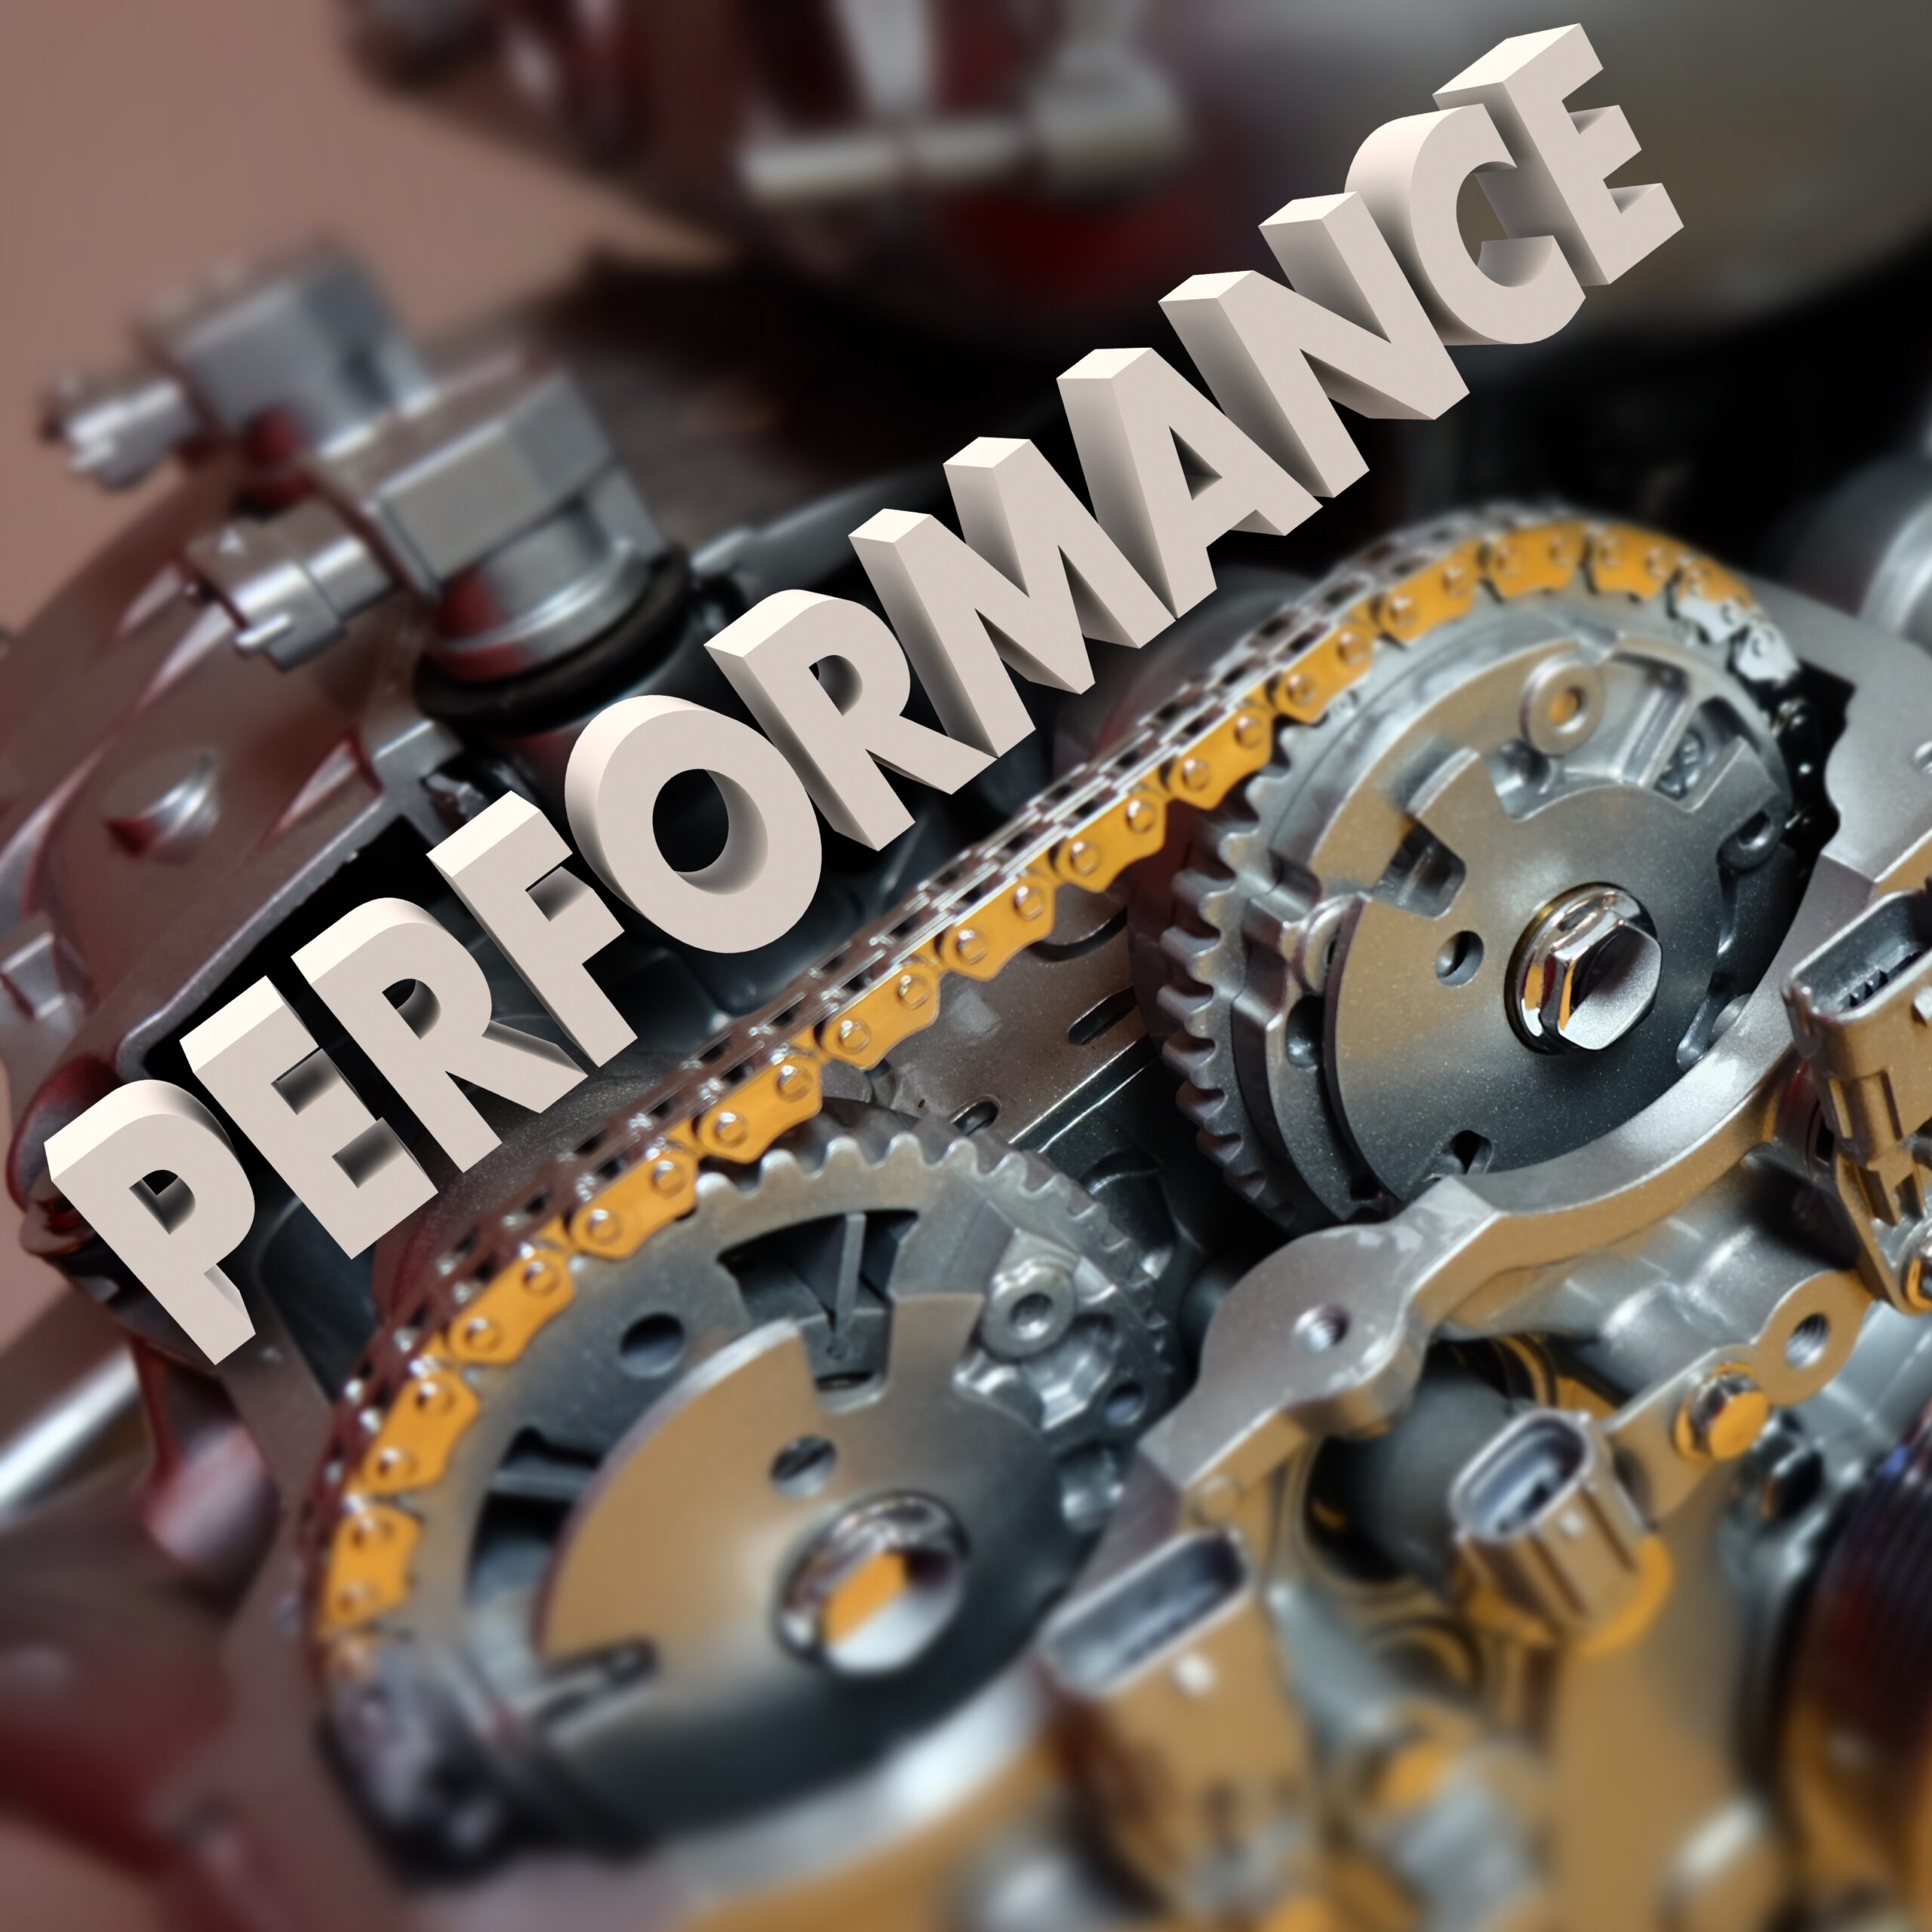 Performance word in 3d letters on a car or automotive engine or motor with great speed, driving or_1-1